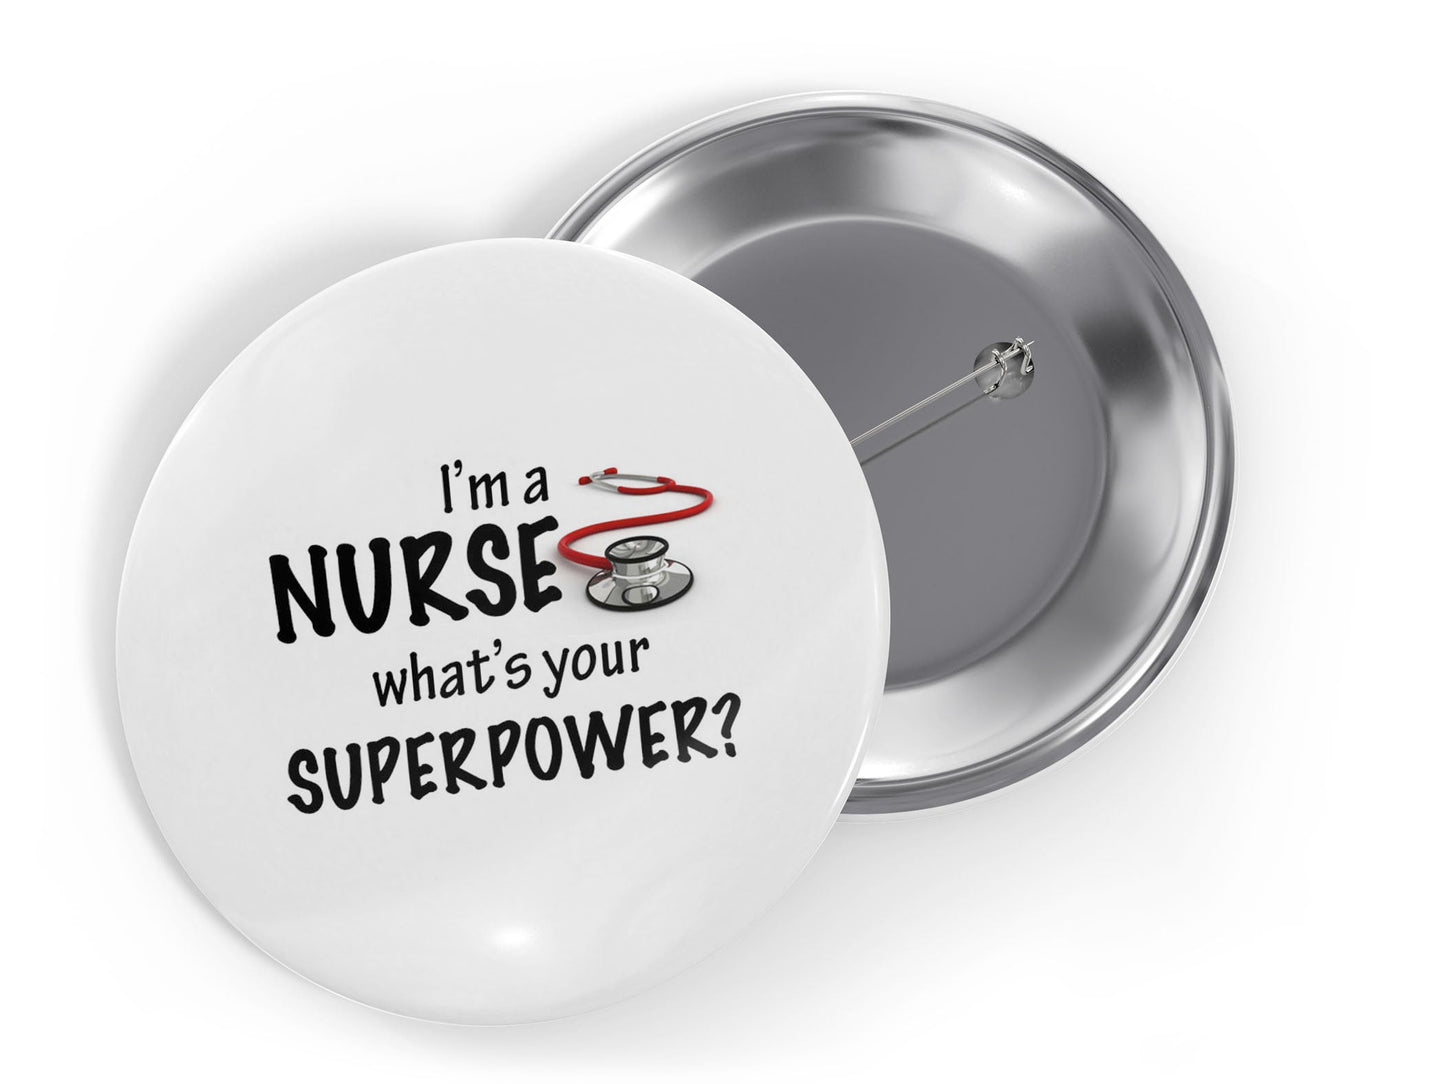 Support Healthcare Workers Mug - Busybee Creates